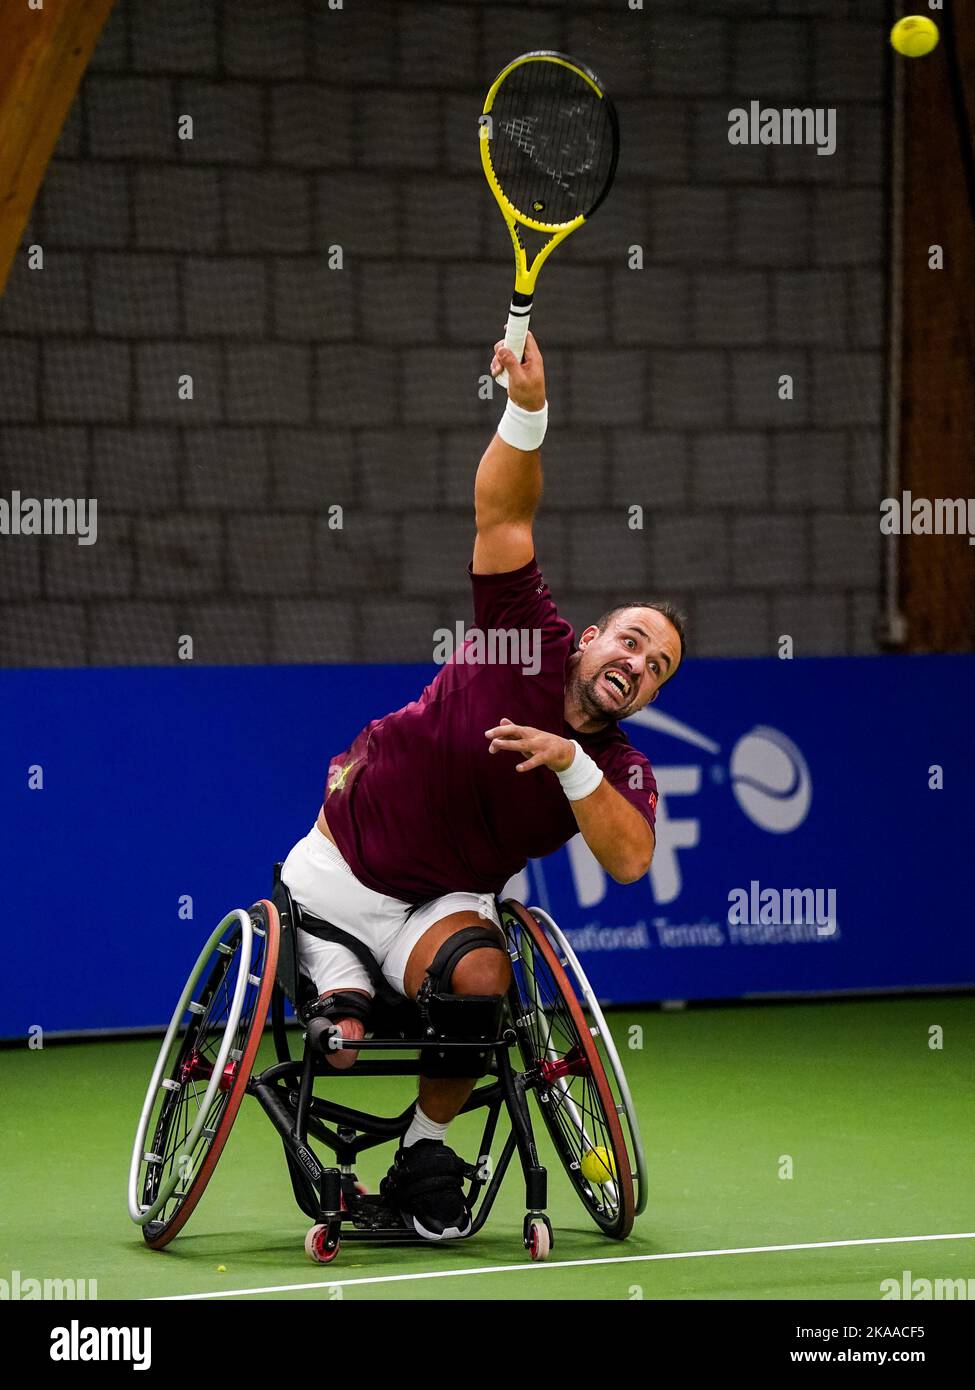 OSS, NETHERLANDS - NOVEMBER 1: Tom Egberink of the Netherlands serves in his match against Shingo Kunieda of Japan during Day 3 of the 2022 ITF Wheelchair Tennis Masters at Sportcentrum de Rusheuvel on November 1, 2022 in Oss, Netherlands (Photo by Rene Nijhuis/Orange Pictures) Stock Photo